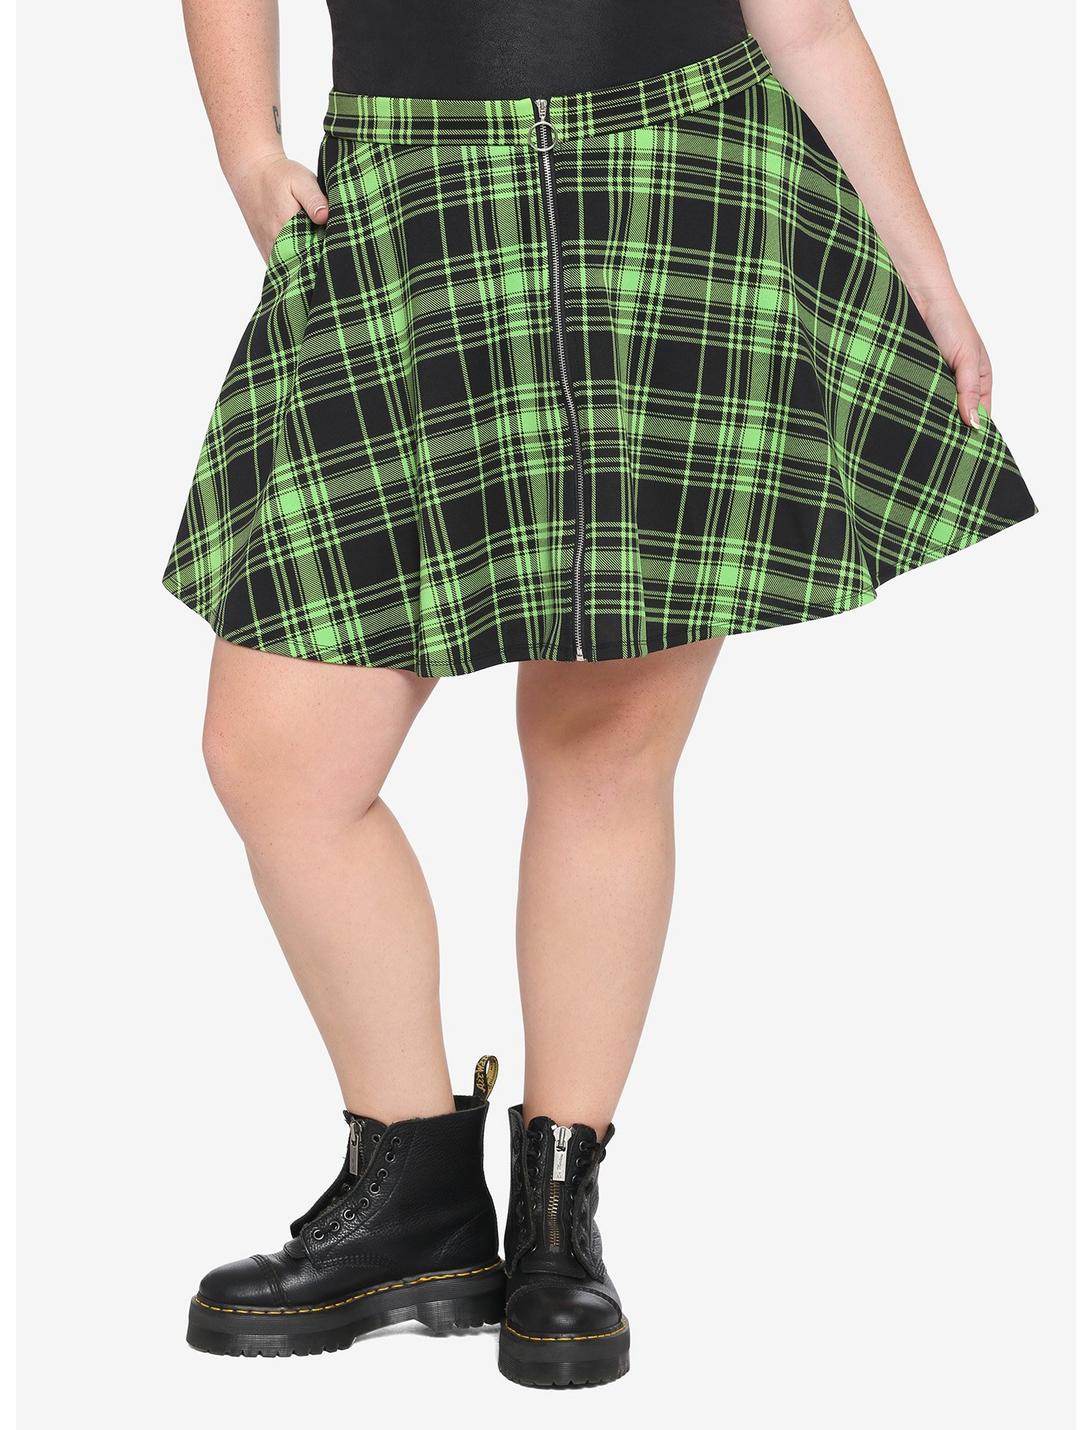 Plaid Skater Skirt, Shop Now at Pseudio!